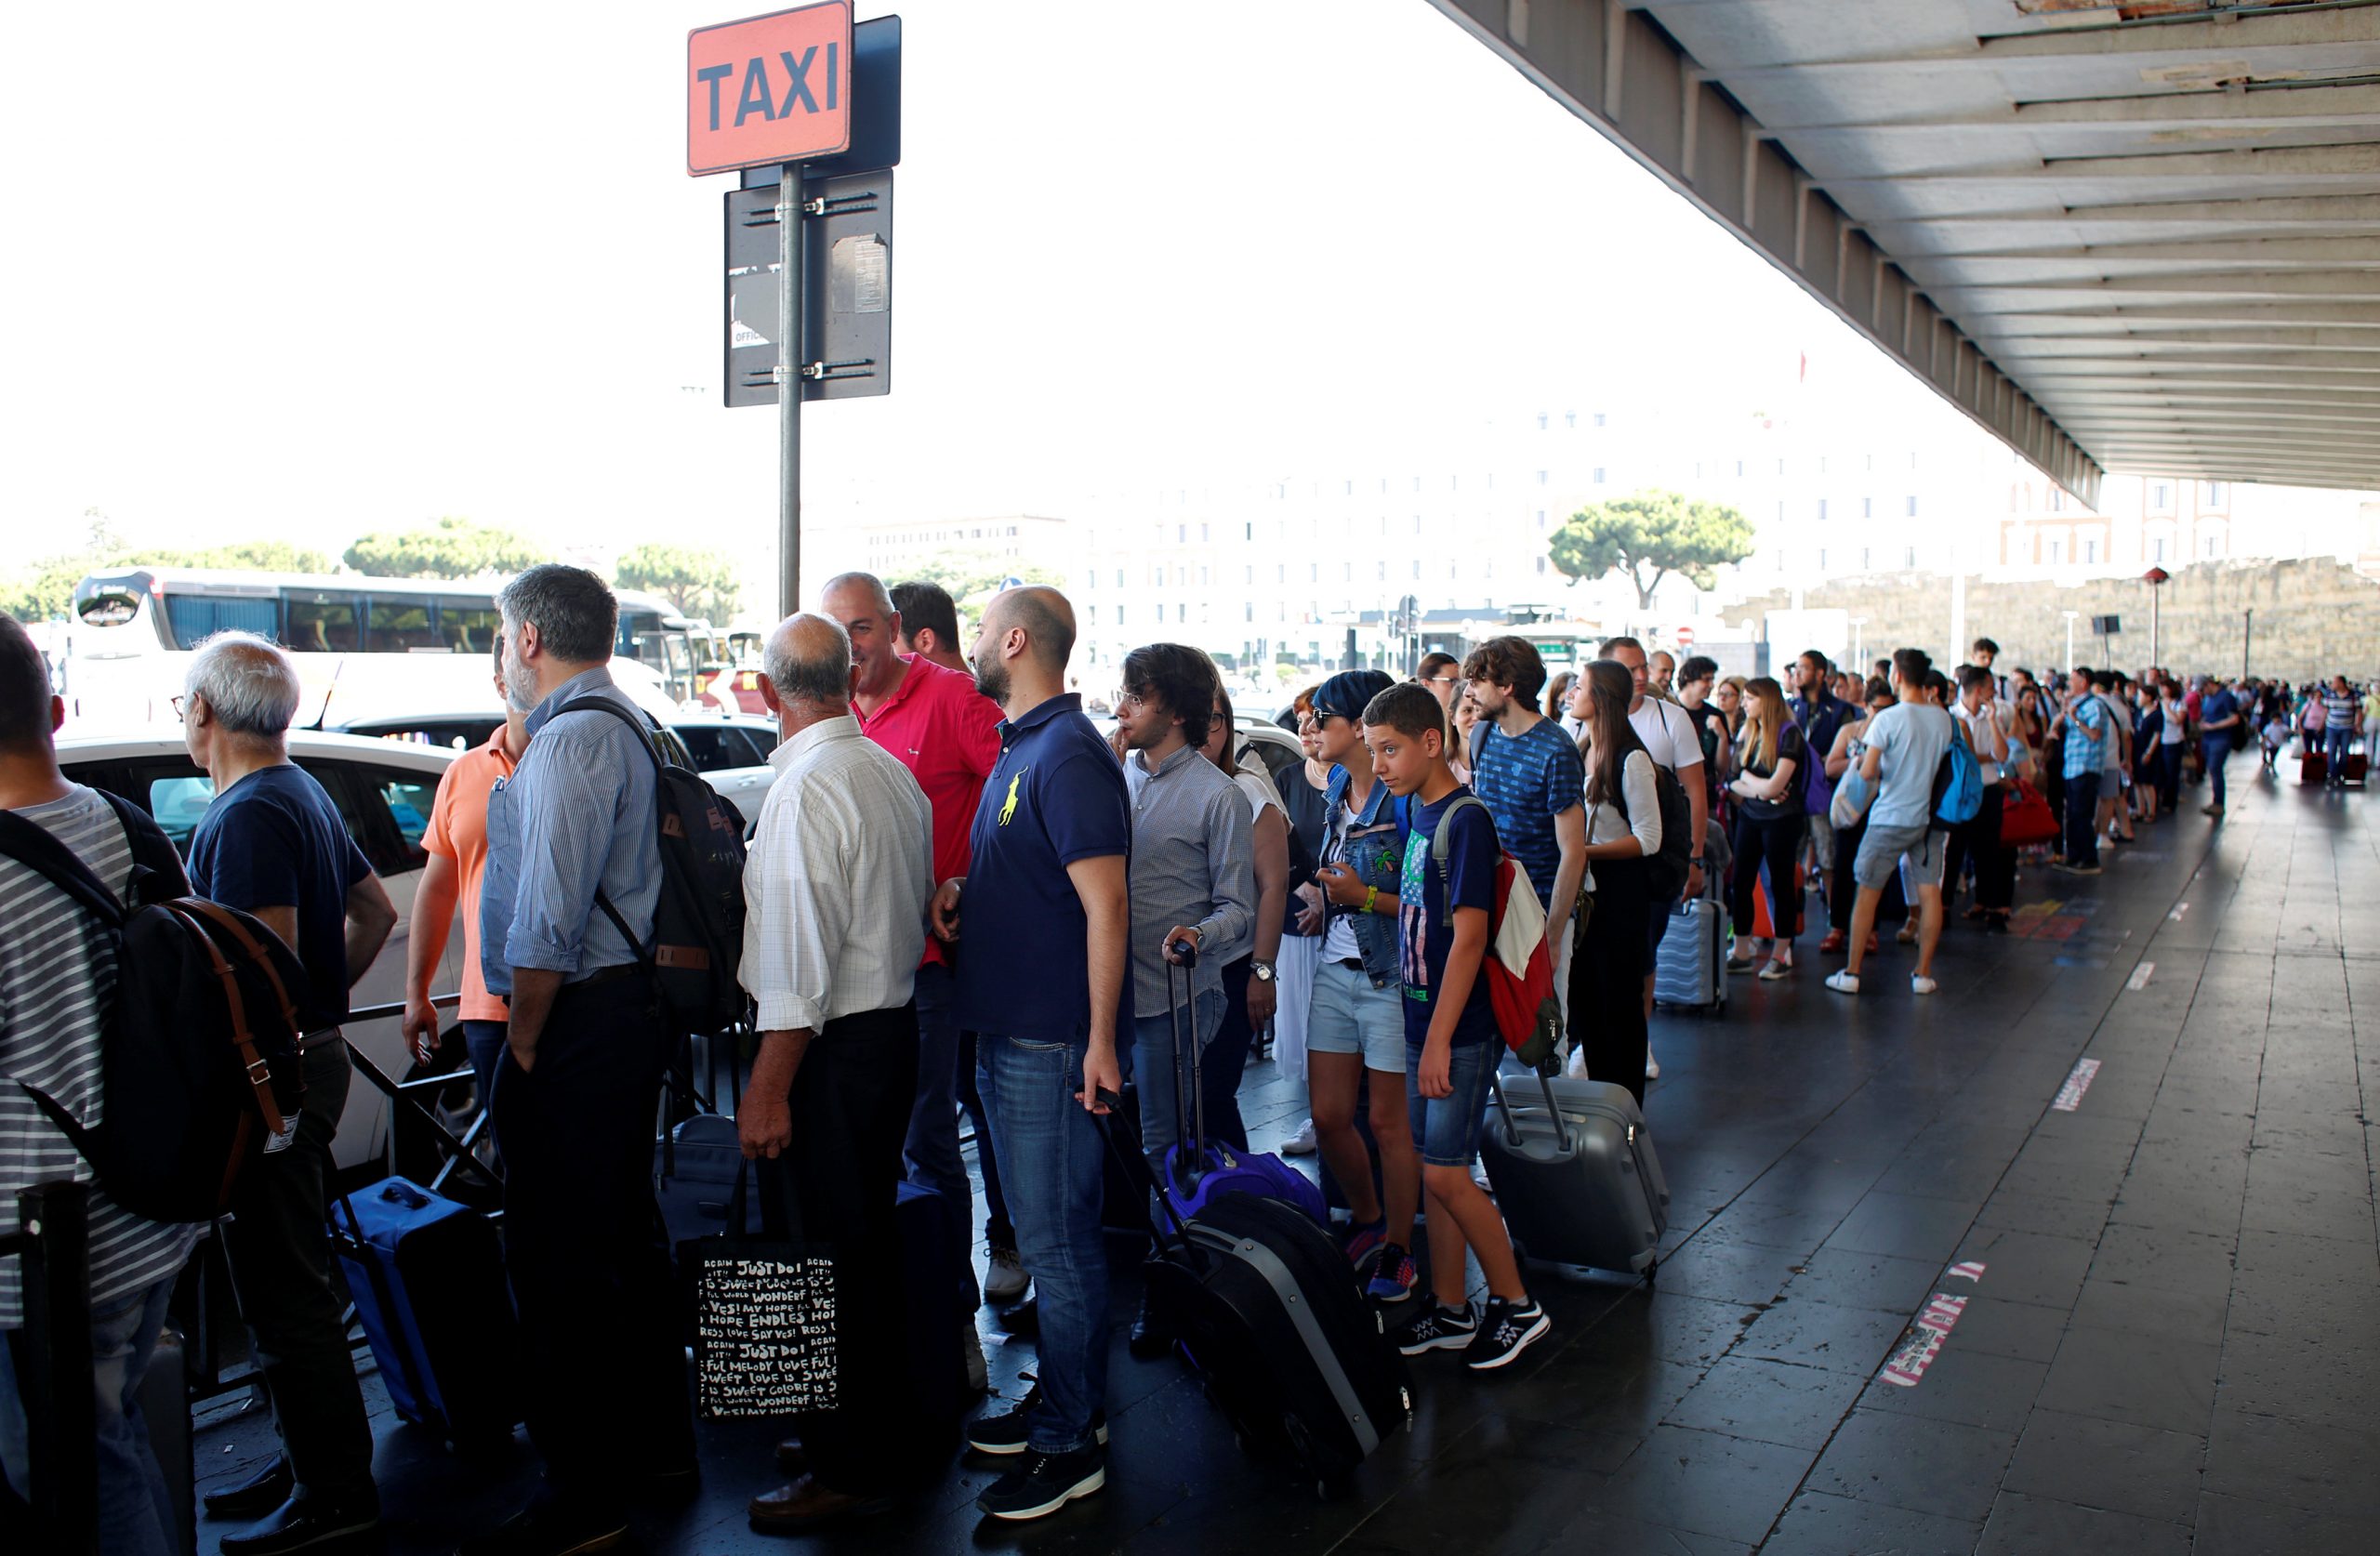 Why Can’t Italy’s Economy Get Into Gear? Consider the Taxi Line